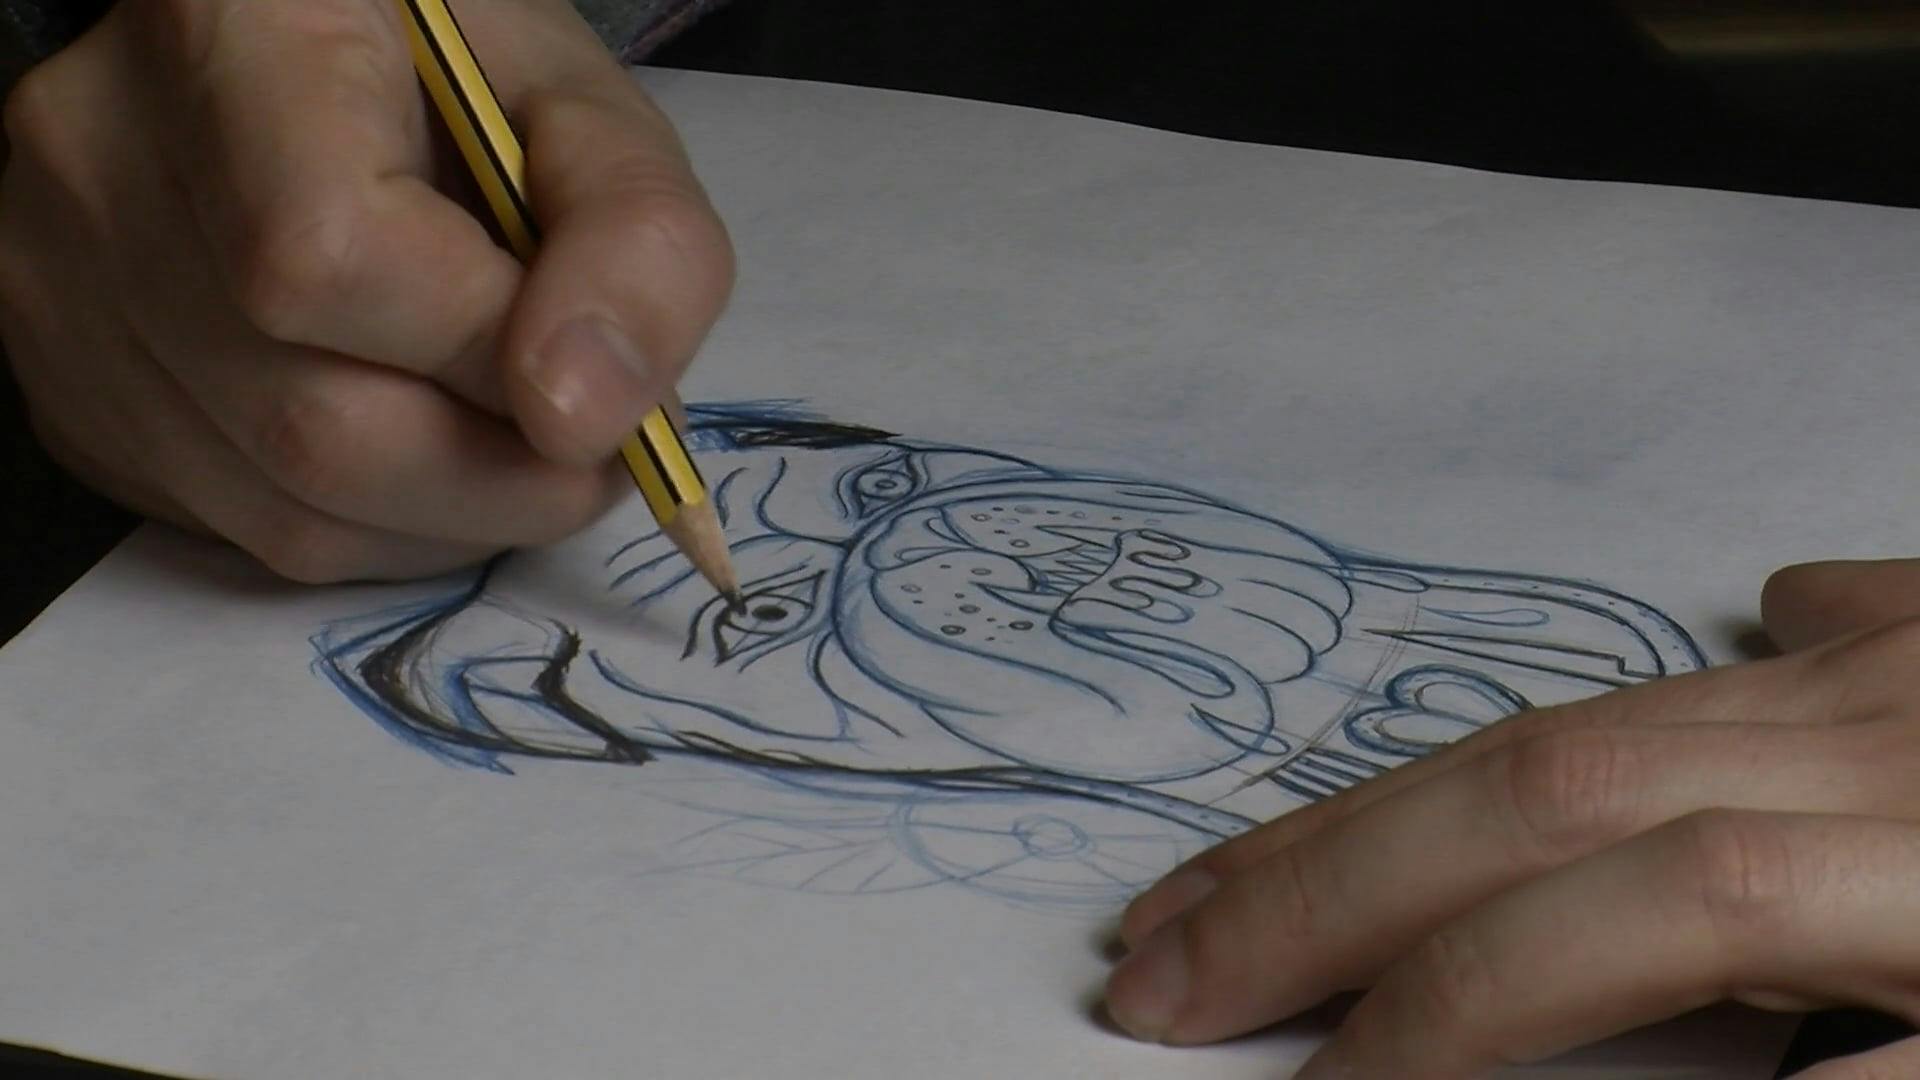 Directed Drawing Videos - Whimsy Workshop Teaching